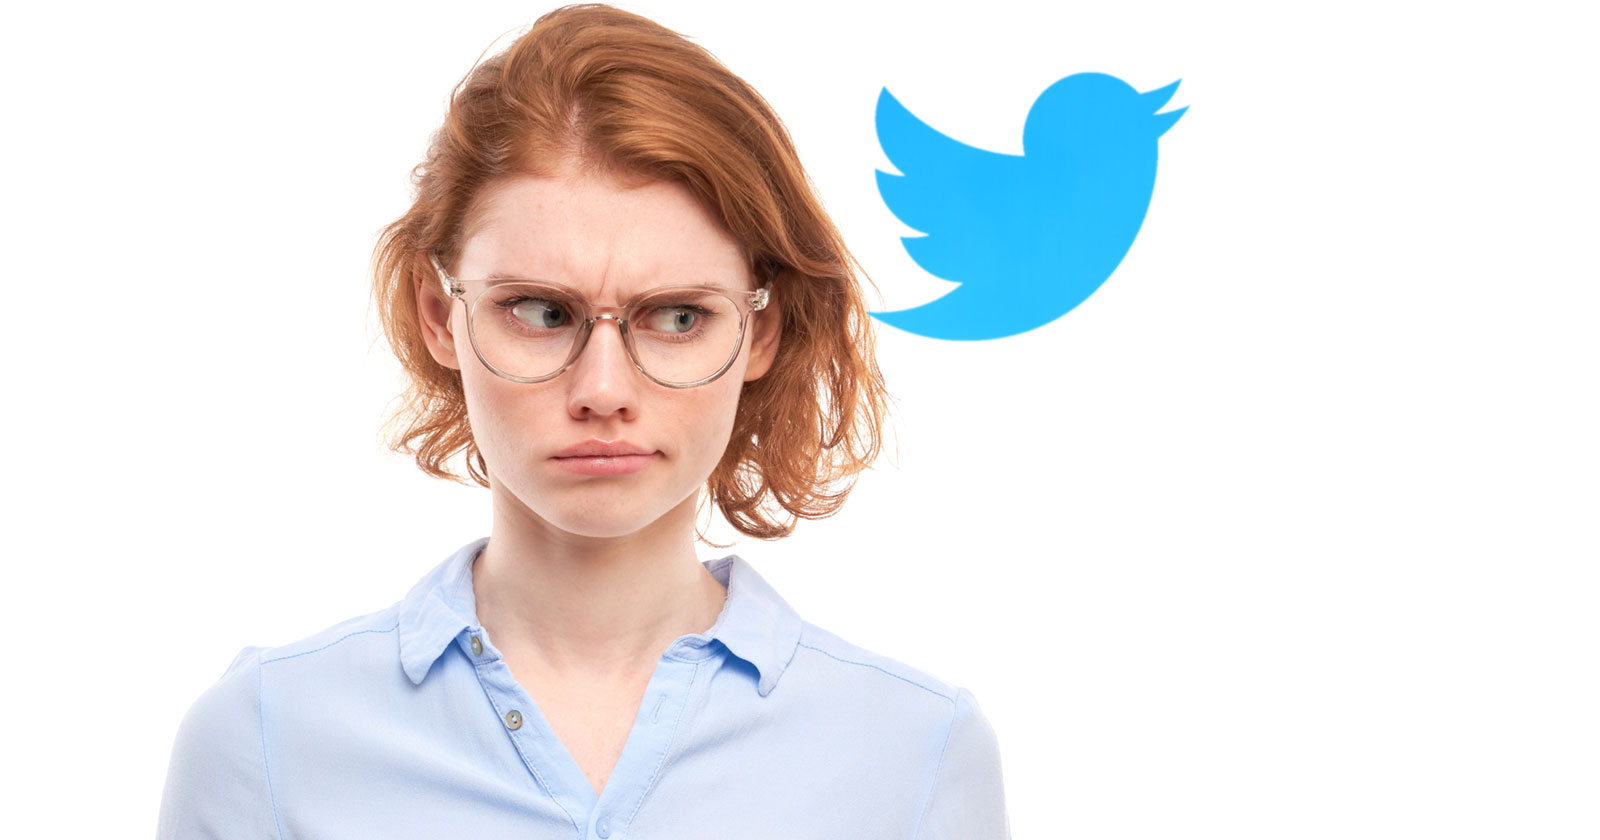 Users are losing confidence that Twitter will survive